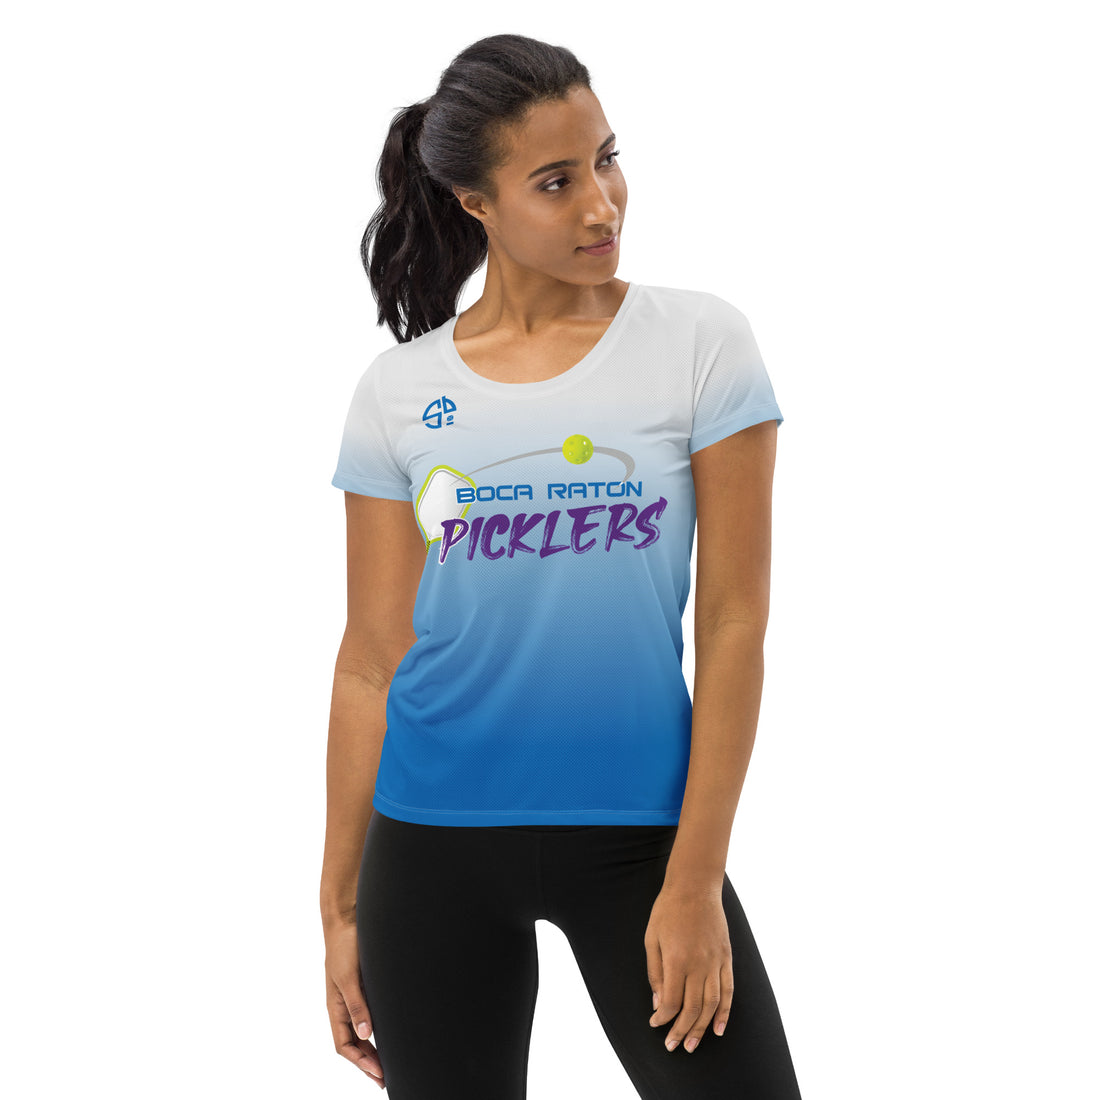 Karla Mulanax 22 Boca Raton Picklers™ SKYblue™ 2023 Authentic Women's Short Sleeve Jersey